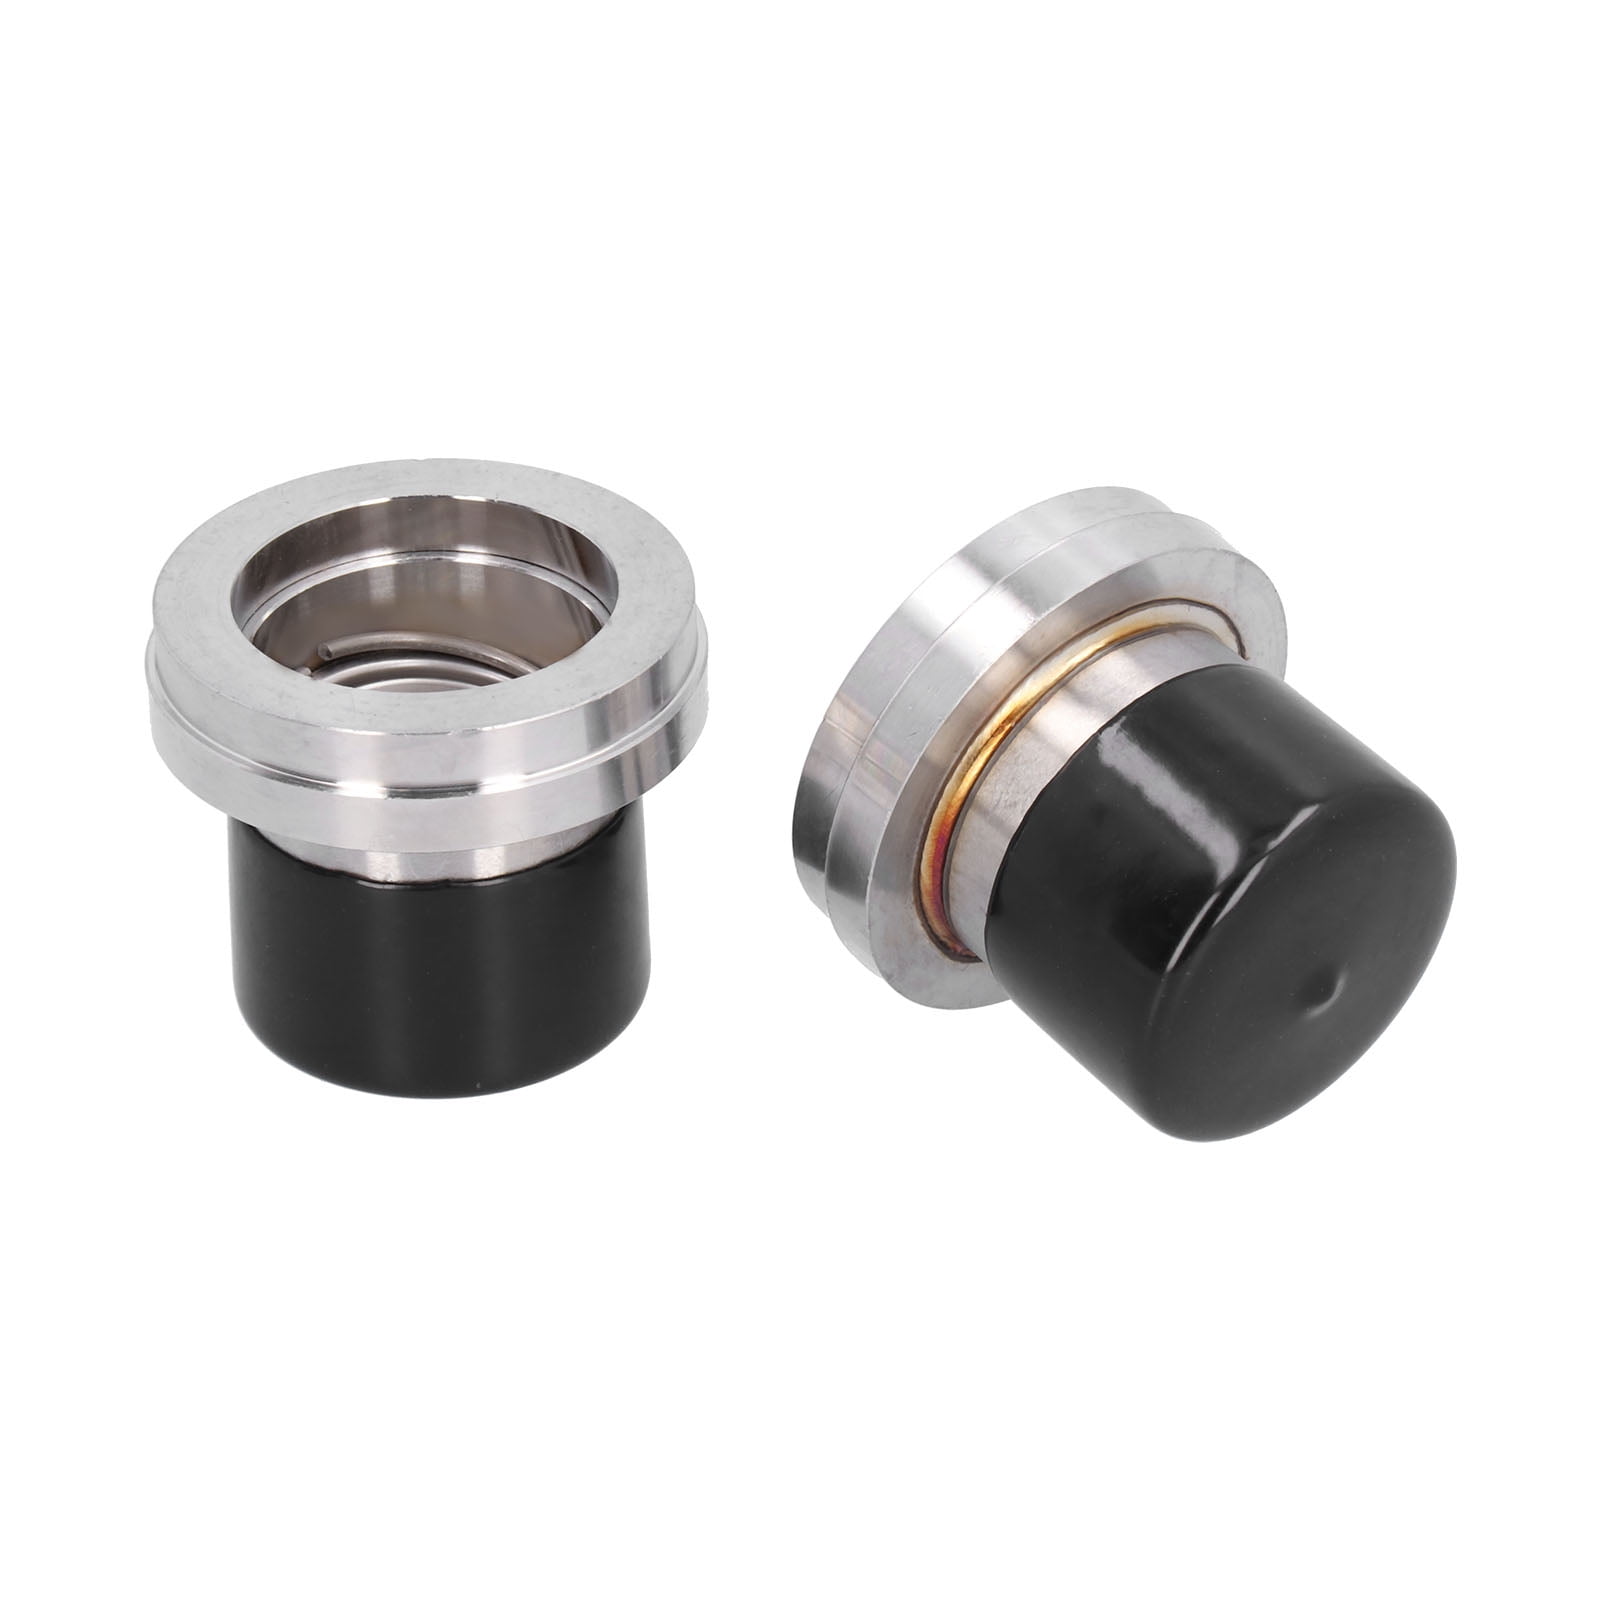 Bearing Dust Cap Protector Stainless Steel,2pcs 2.717in Bearing Buddy Protectors Stainless Steel Lubricators Accessory for Trailers Boats 